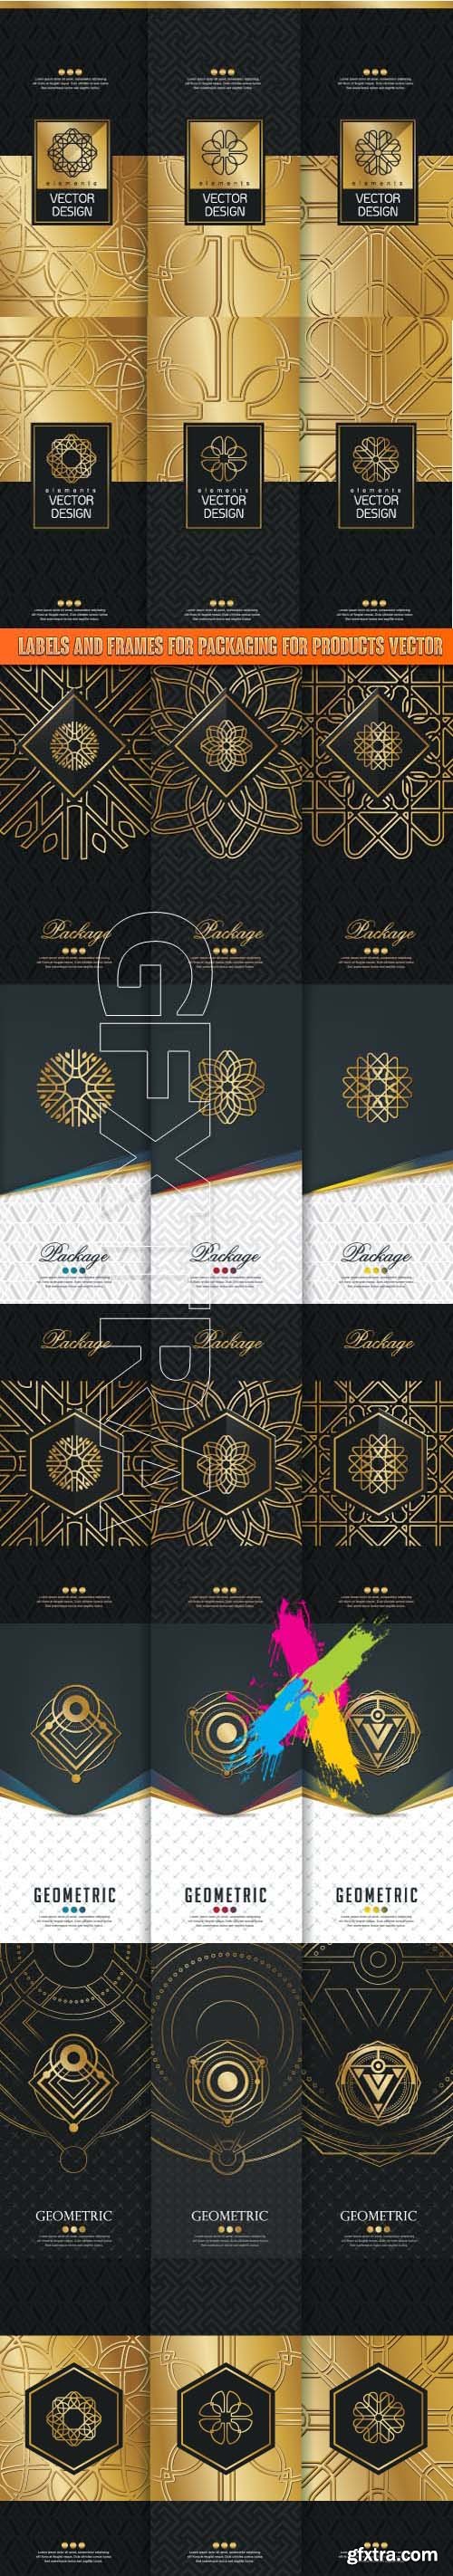 Labels and frames for packaging for products vector